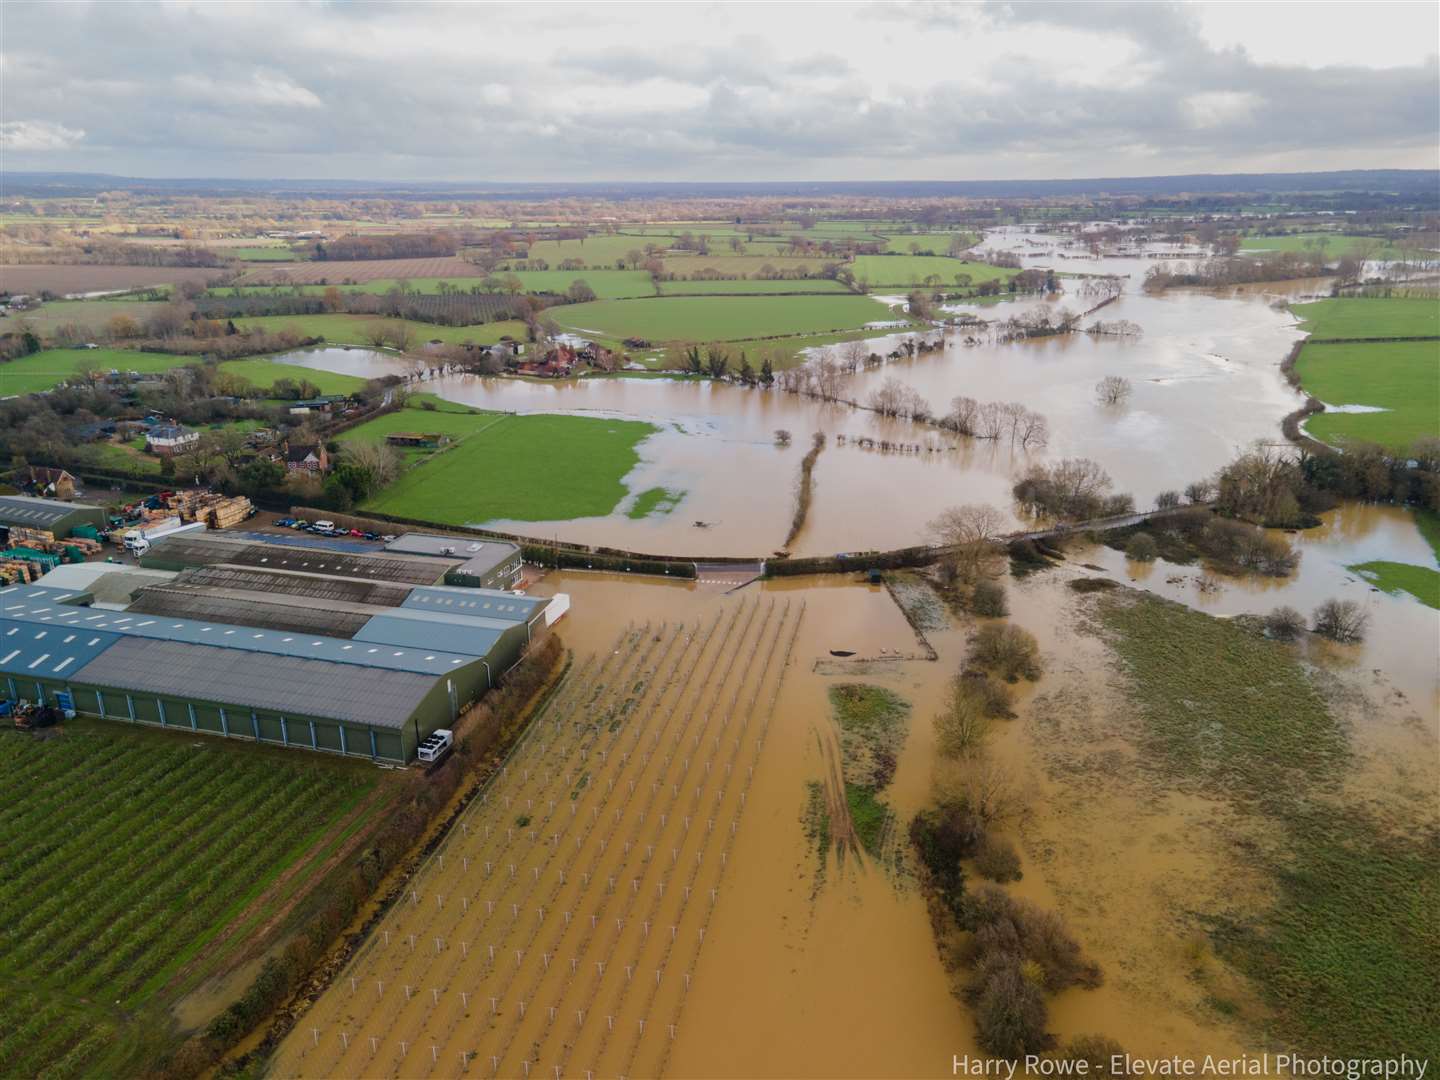 Flooding across the Maidstone area. Picture: Harry Rowe/Elevate Aerial Photography